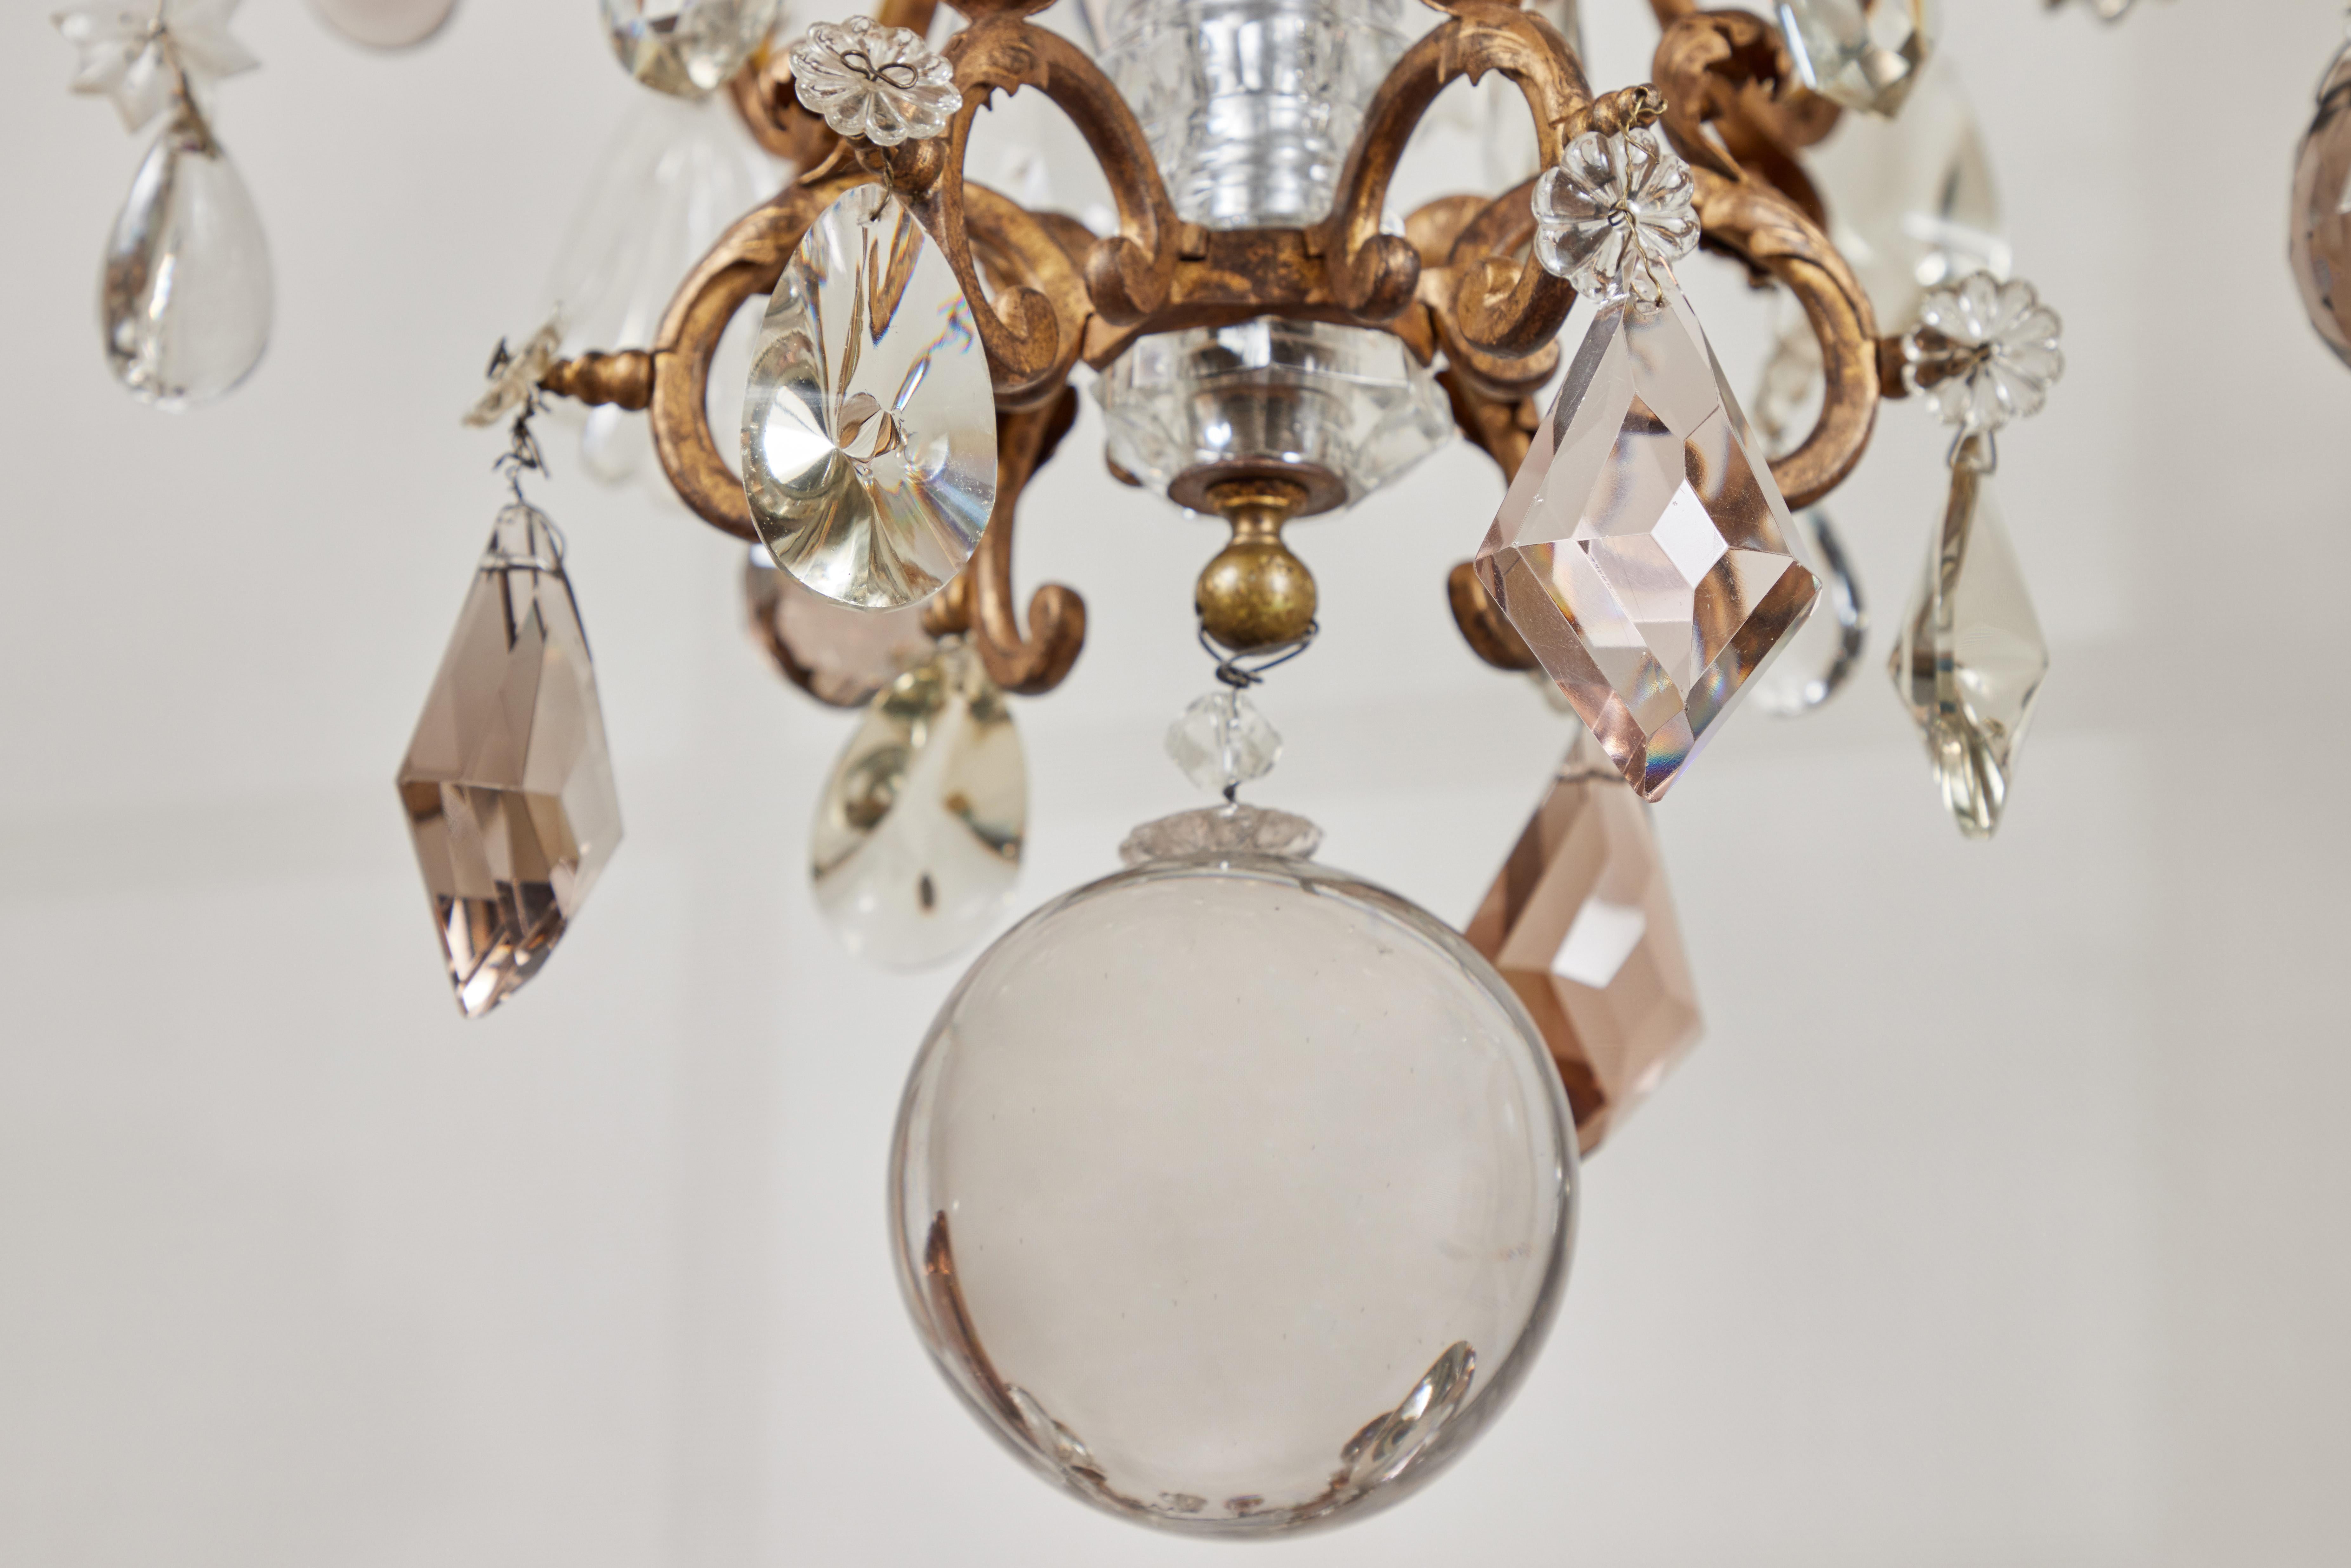 An elegant, detailed, 19th c. French chandelier featuring a scrolling, foliate form gilt bronze carriage embellished with a variety of clear and amber crystals. Made by the renowned Maison Baguès in Paris.